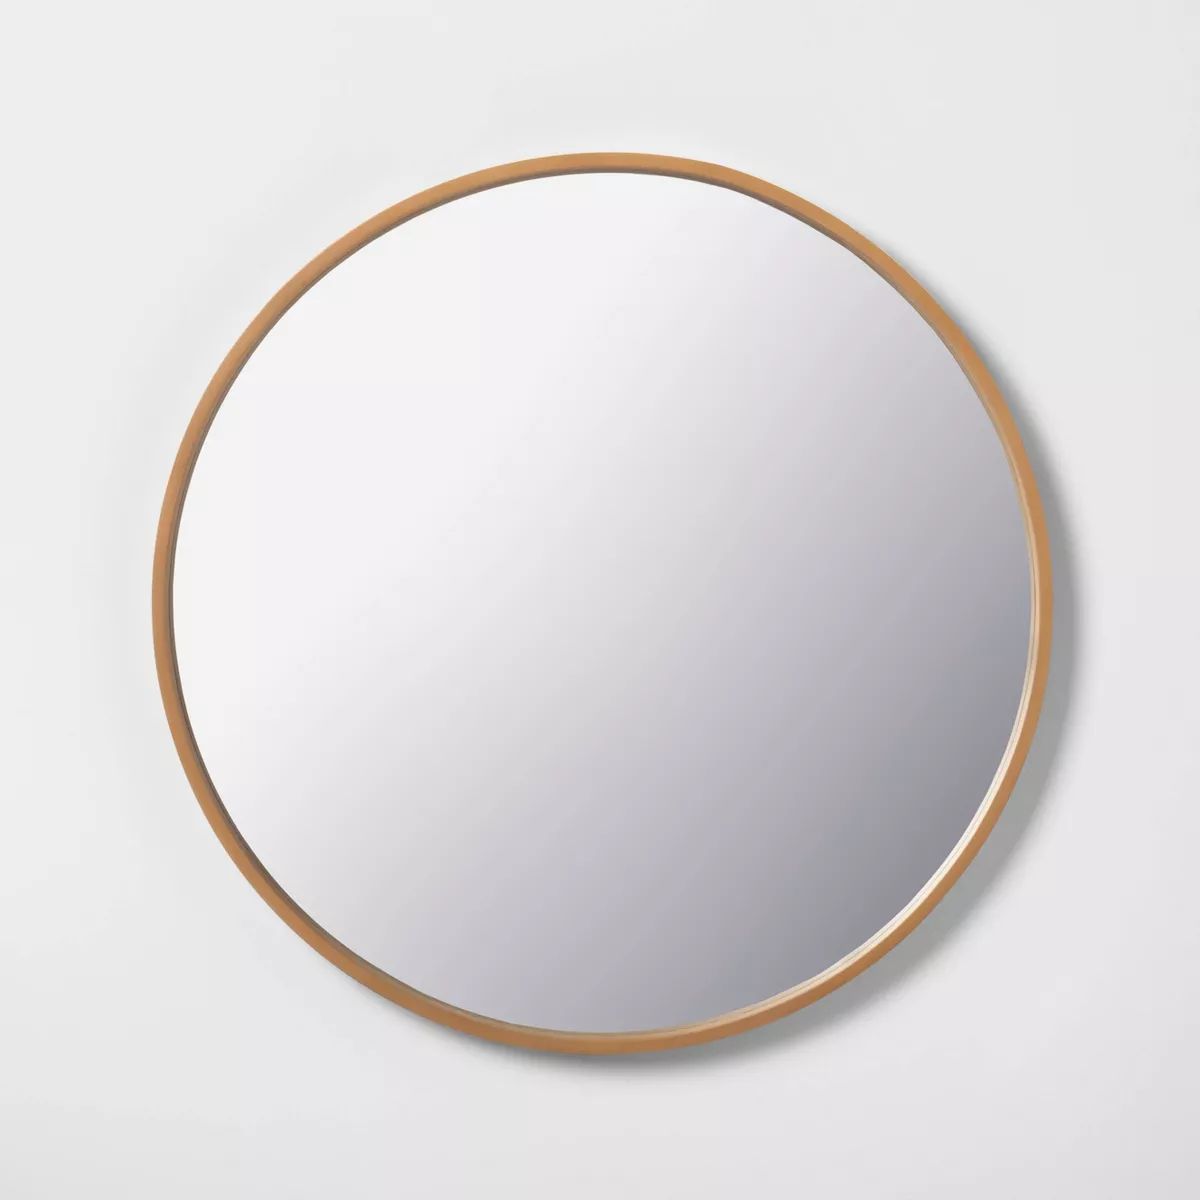 30" Round Wood Framed Wall Mirror Natural - Hearth & Hand™ with Magnolia | Target